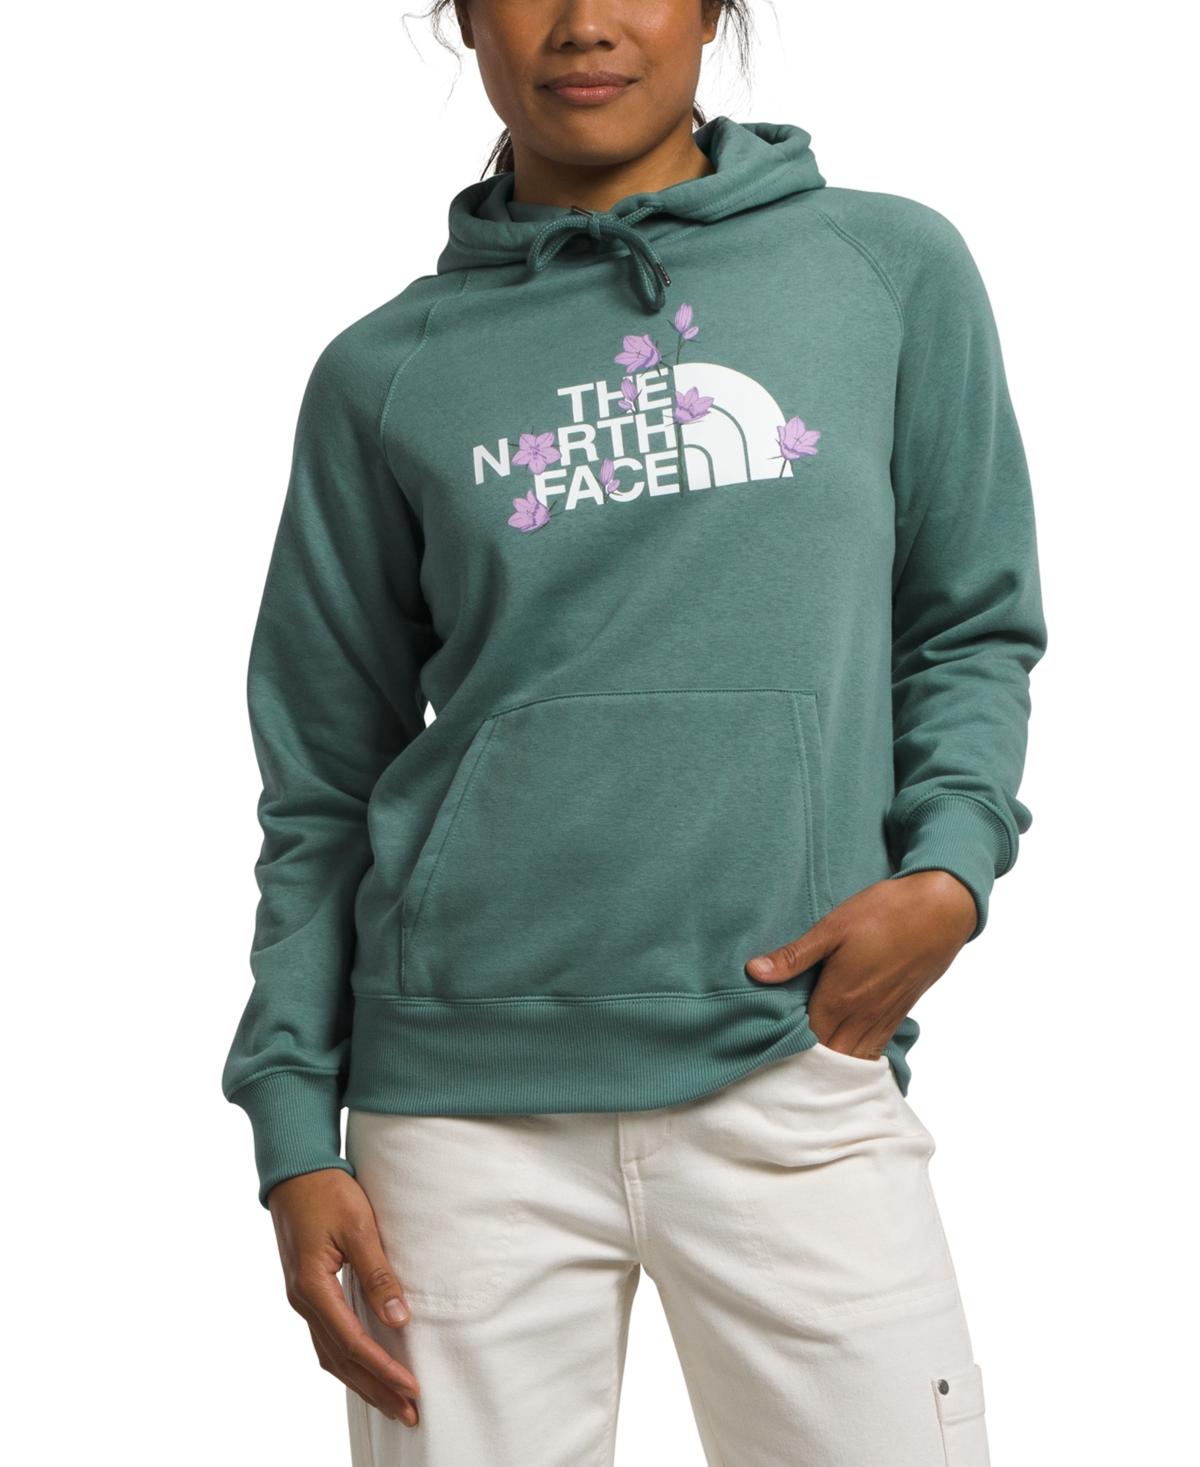 The North Face Brand Proud Logo Fleece Hoodie in White | Lyst